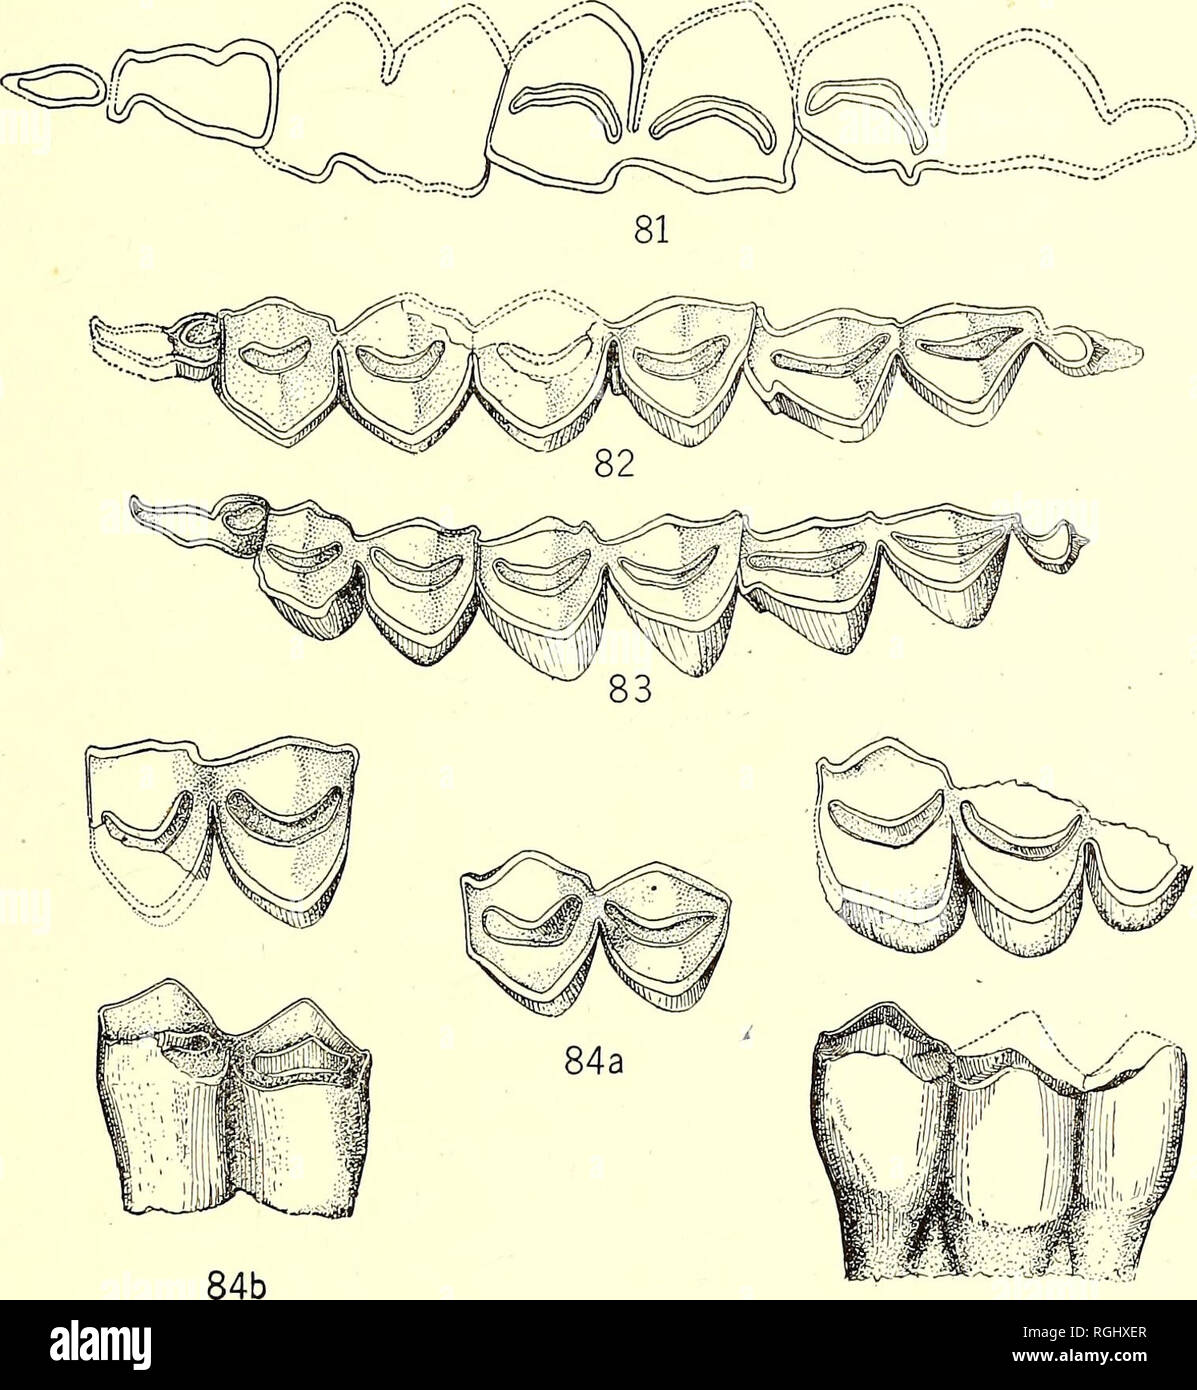 . Bulletin of the Department of Geology. Geology. 1921] Frick: Faunas of Bautista Creek and San Timoteo.. Canon 369. 84c rigs. 81 to 84c. Frocamelus, lower cheek teeth, X 1. Fig. 81, P. e. edensis, n. sp., occlusal view of type specimen, no. 23428 (see fig. 74); fig. 82, P. e. raki, n. subsp., lower teeth, no. 23427 (see fig. 77); fig. 83, P. e. raki, n. subsp., occlusal view of type specimen, no. 23423 (see fig. 76); figs. 84a to 84c, Camelid, three molar teeth, nos. 23436, 23438, and 23438a. Eden beds, California.. Please note that these images are extracted from scanned page images that may Stock Photo